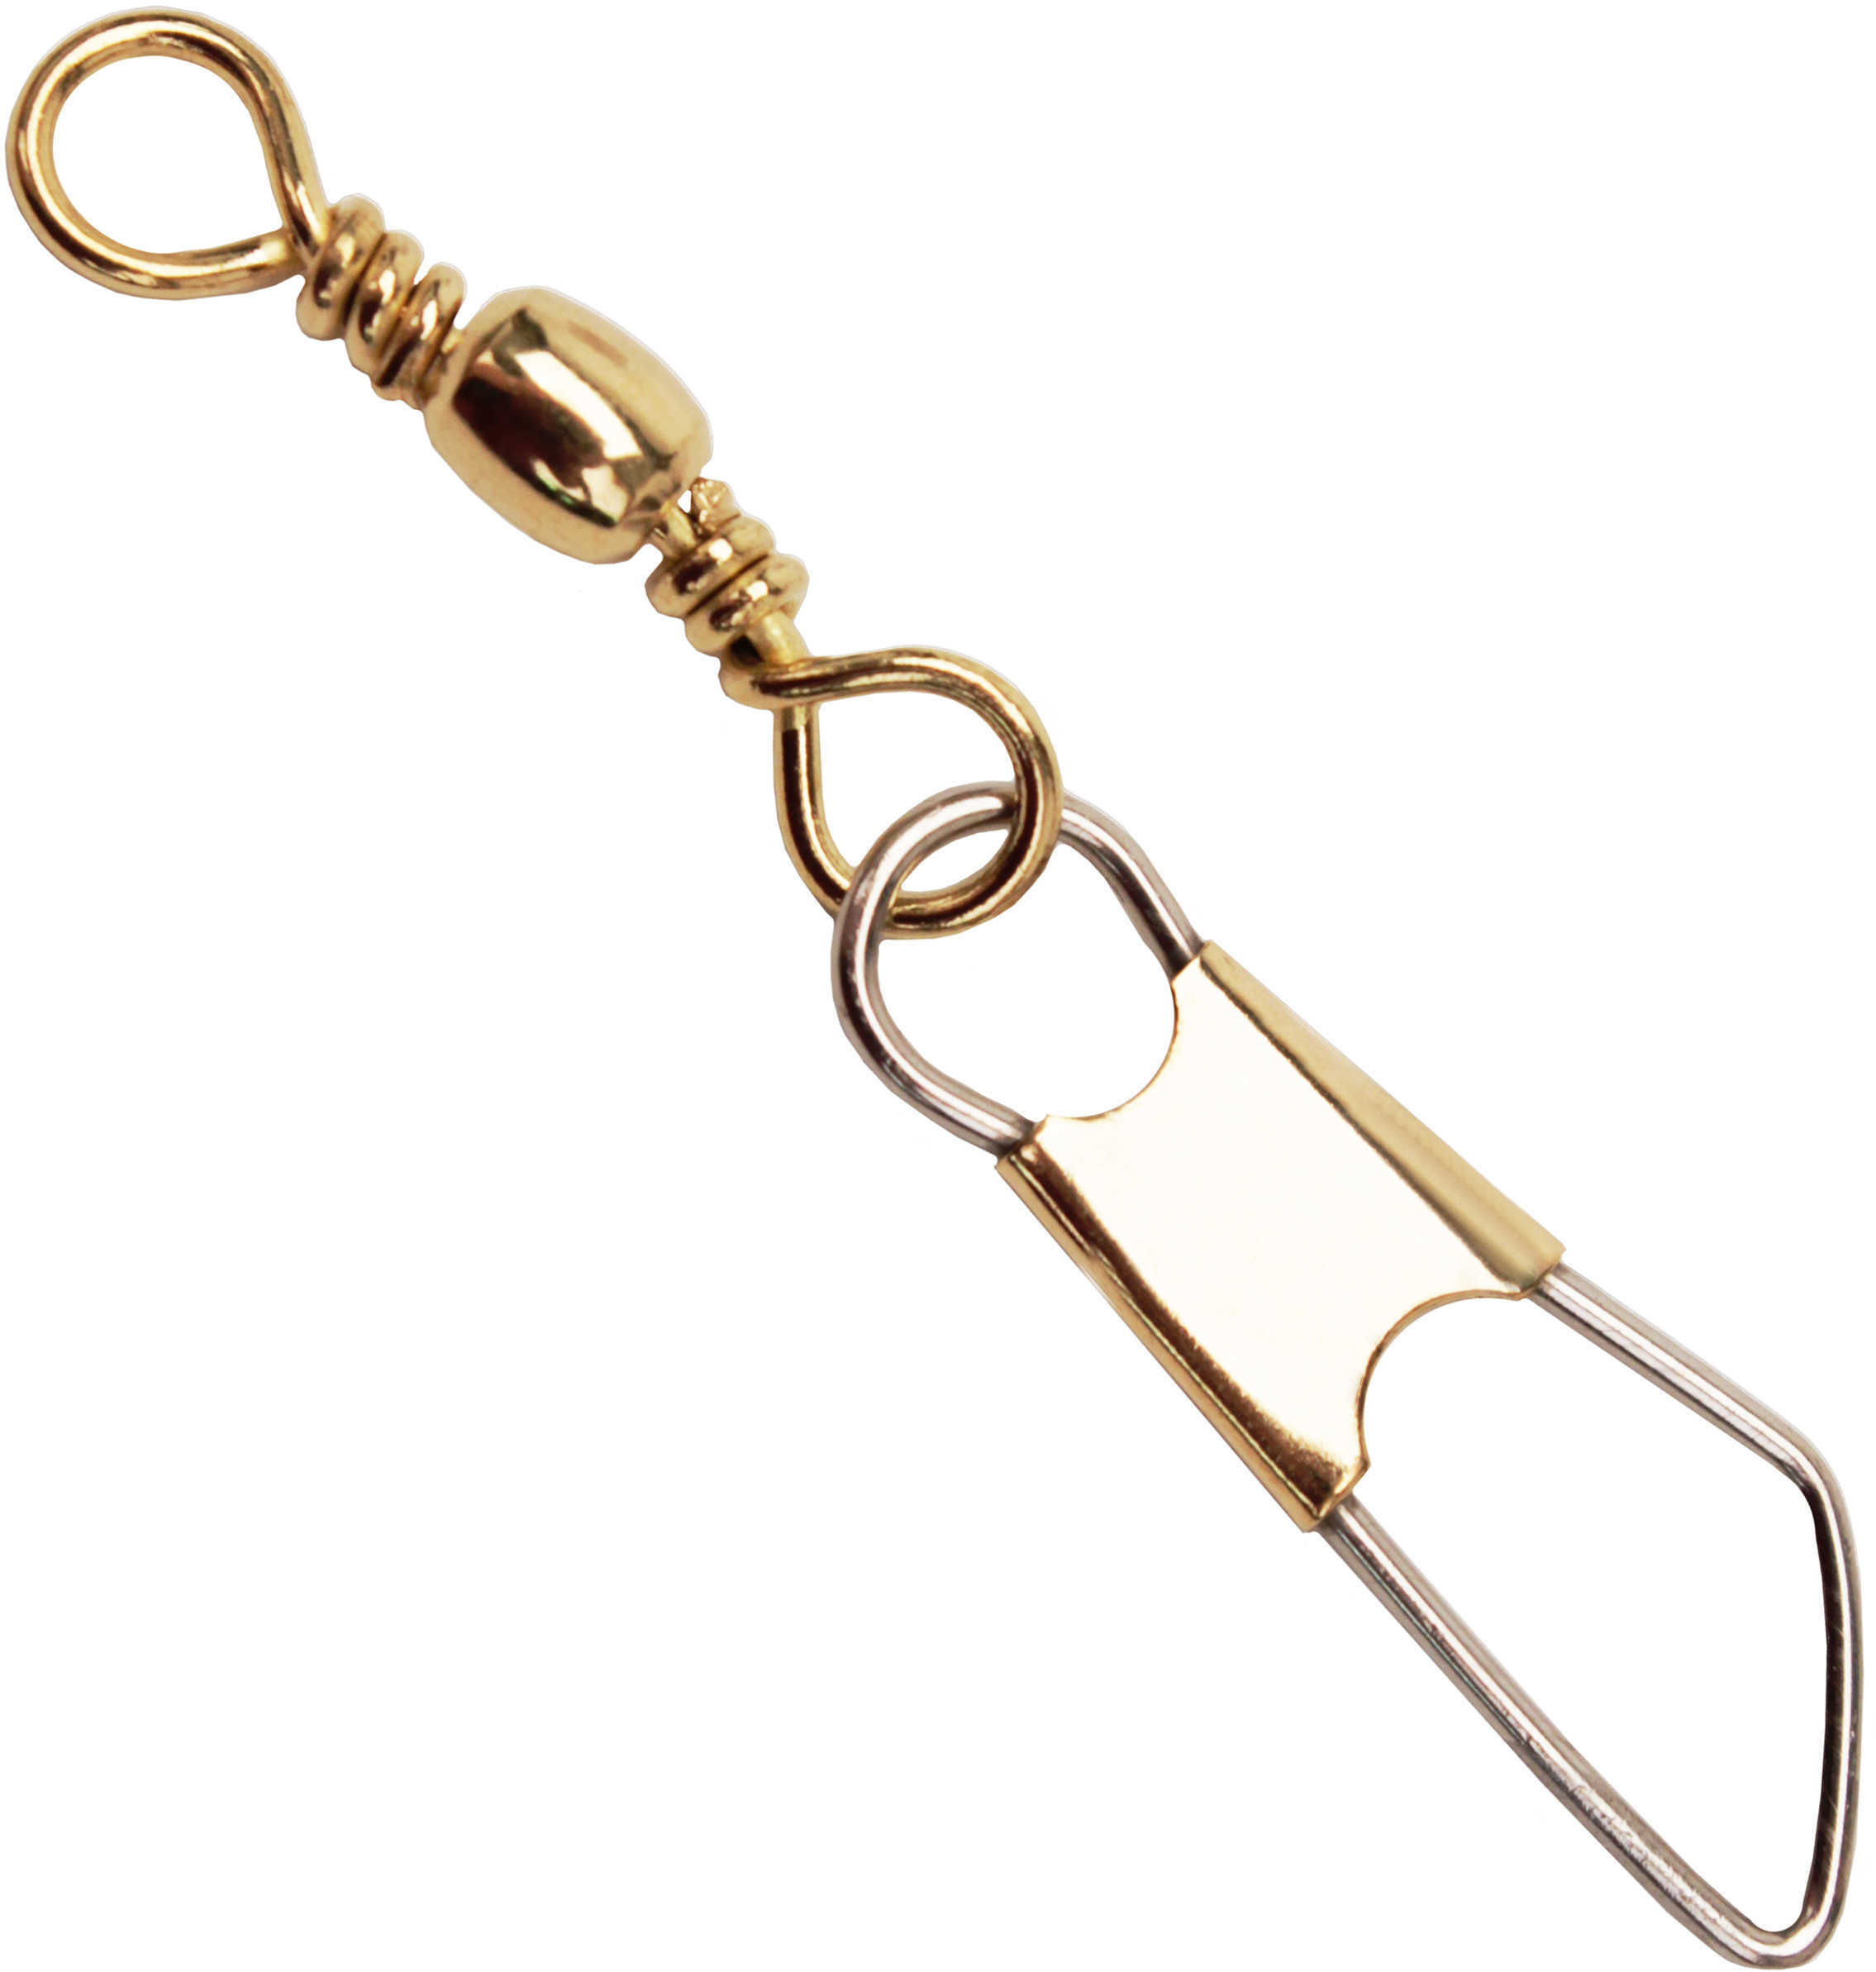 Eagle Claw Fishing Tackle Brass Barrel Swivel w/Safety Snap Size 18 (Per 7) Md: 01041-018